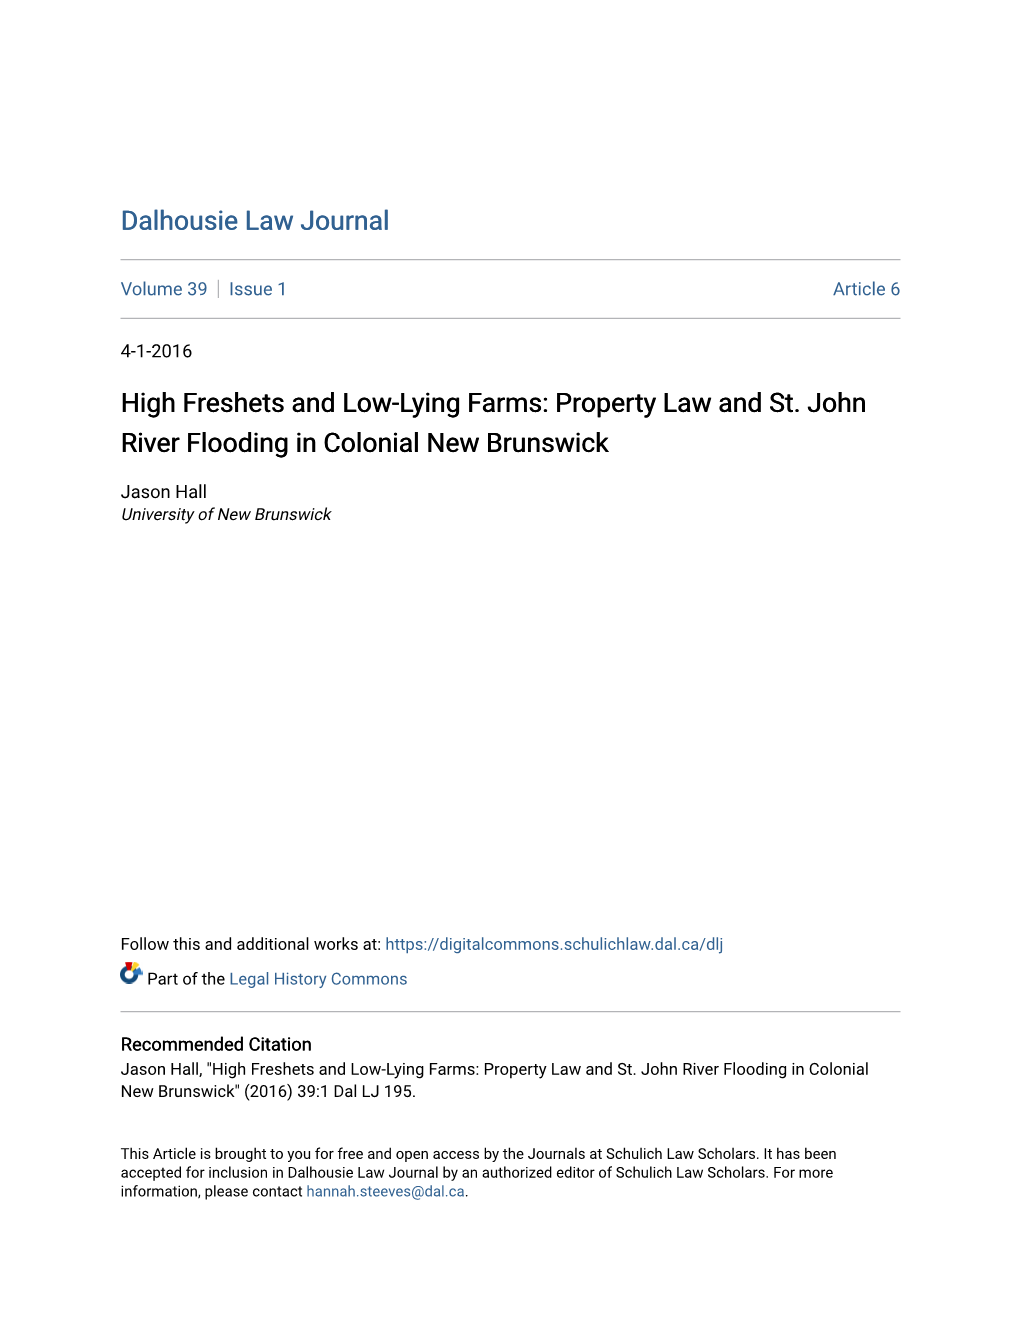 High Freshets and Low-Lying Farms: Property Law and St. John River Flooding in Colonial New Brunswick